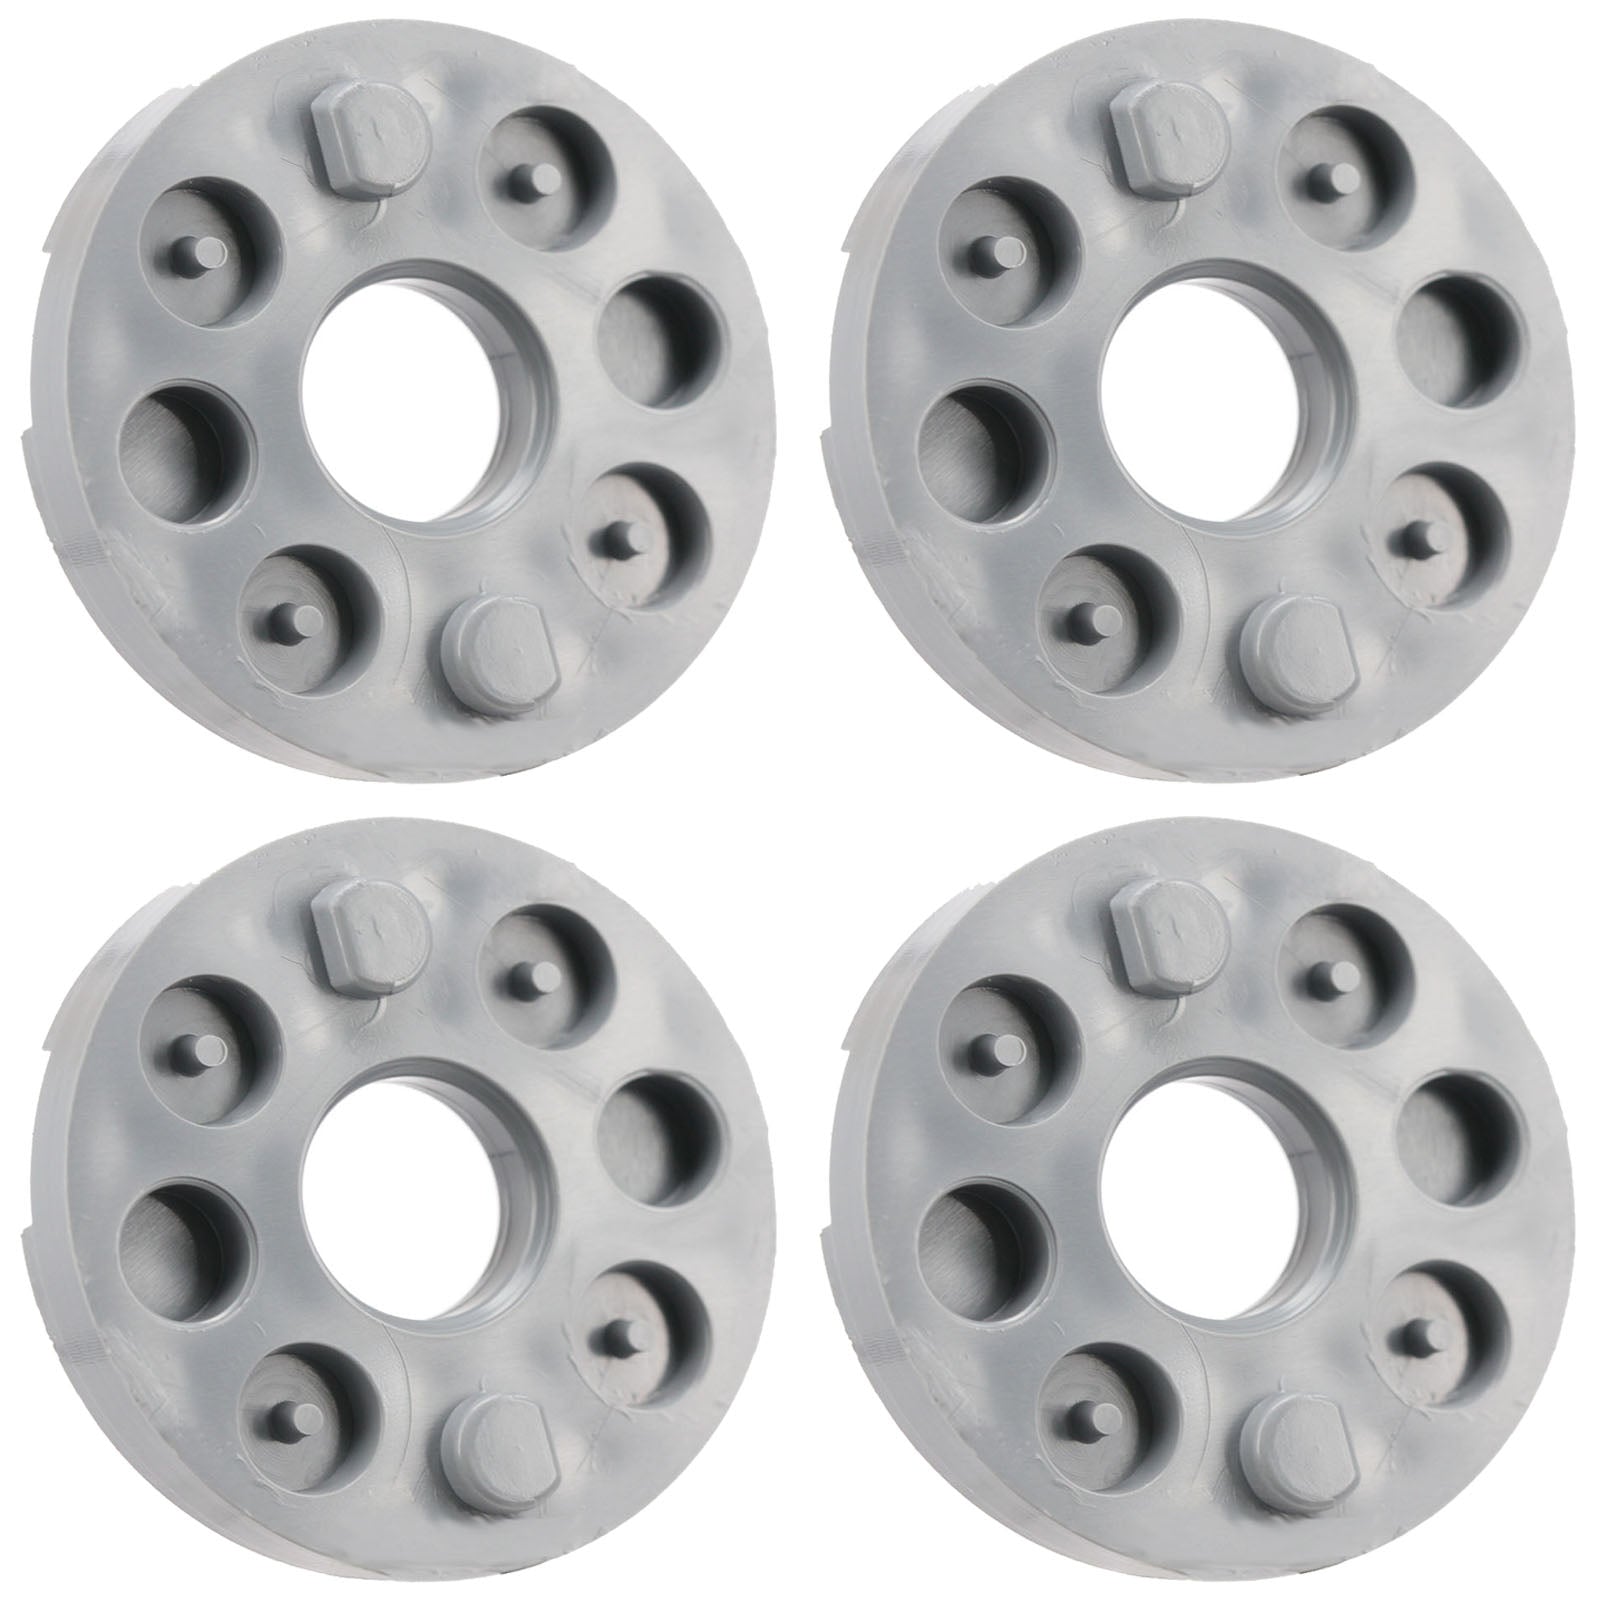 Blade Height Spacers for FLYMO Hoverstripe RXE250 300 Hovervac 280 300 400 Lawnmower x 4